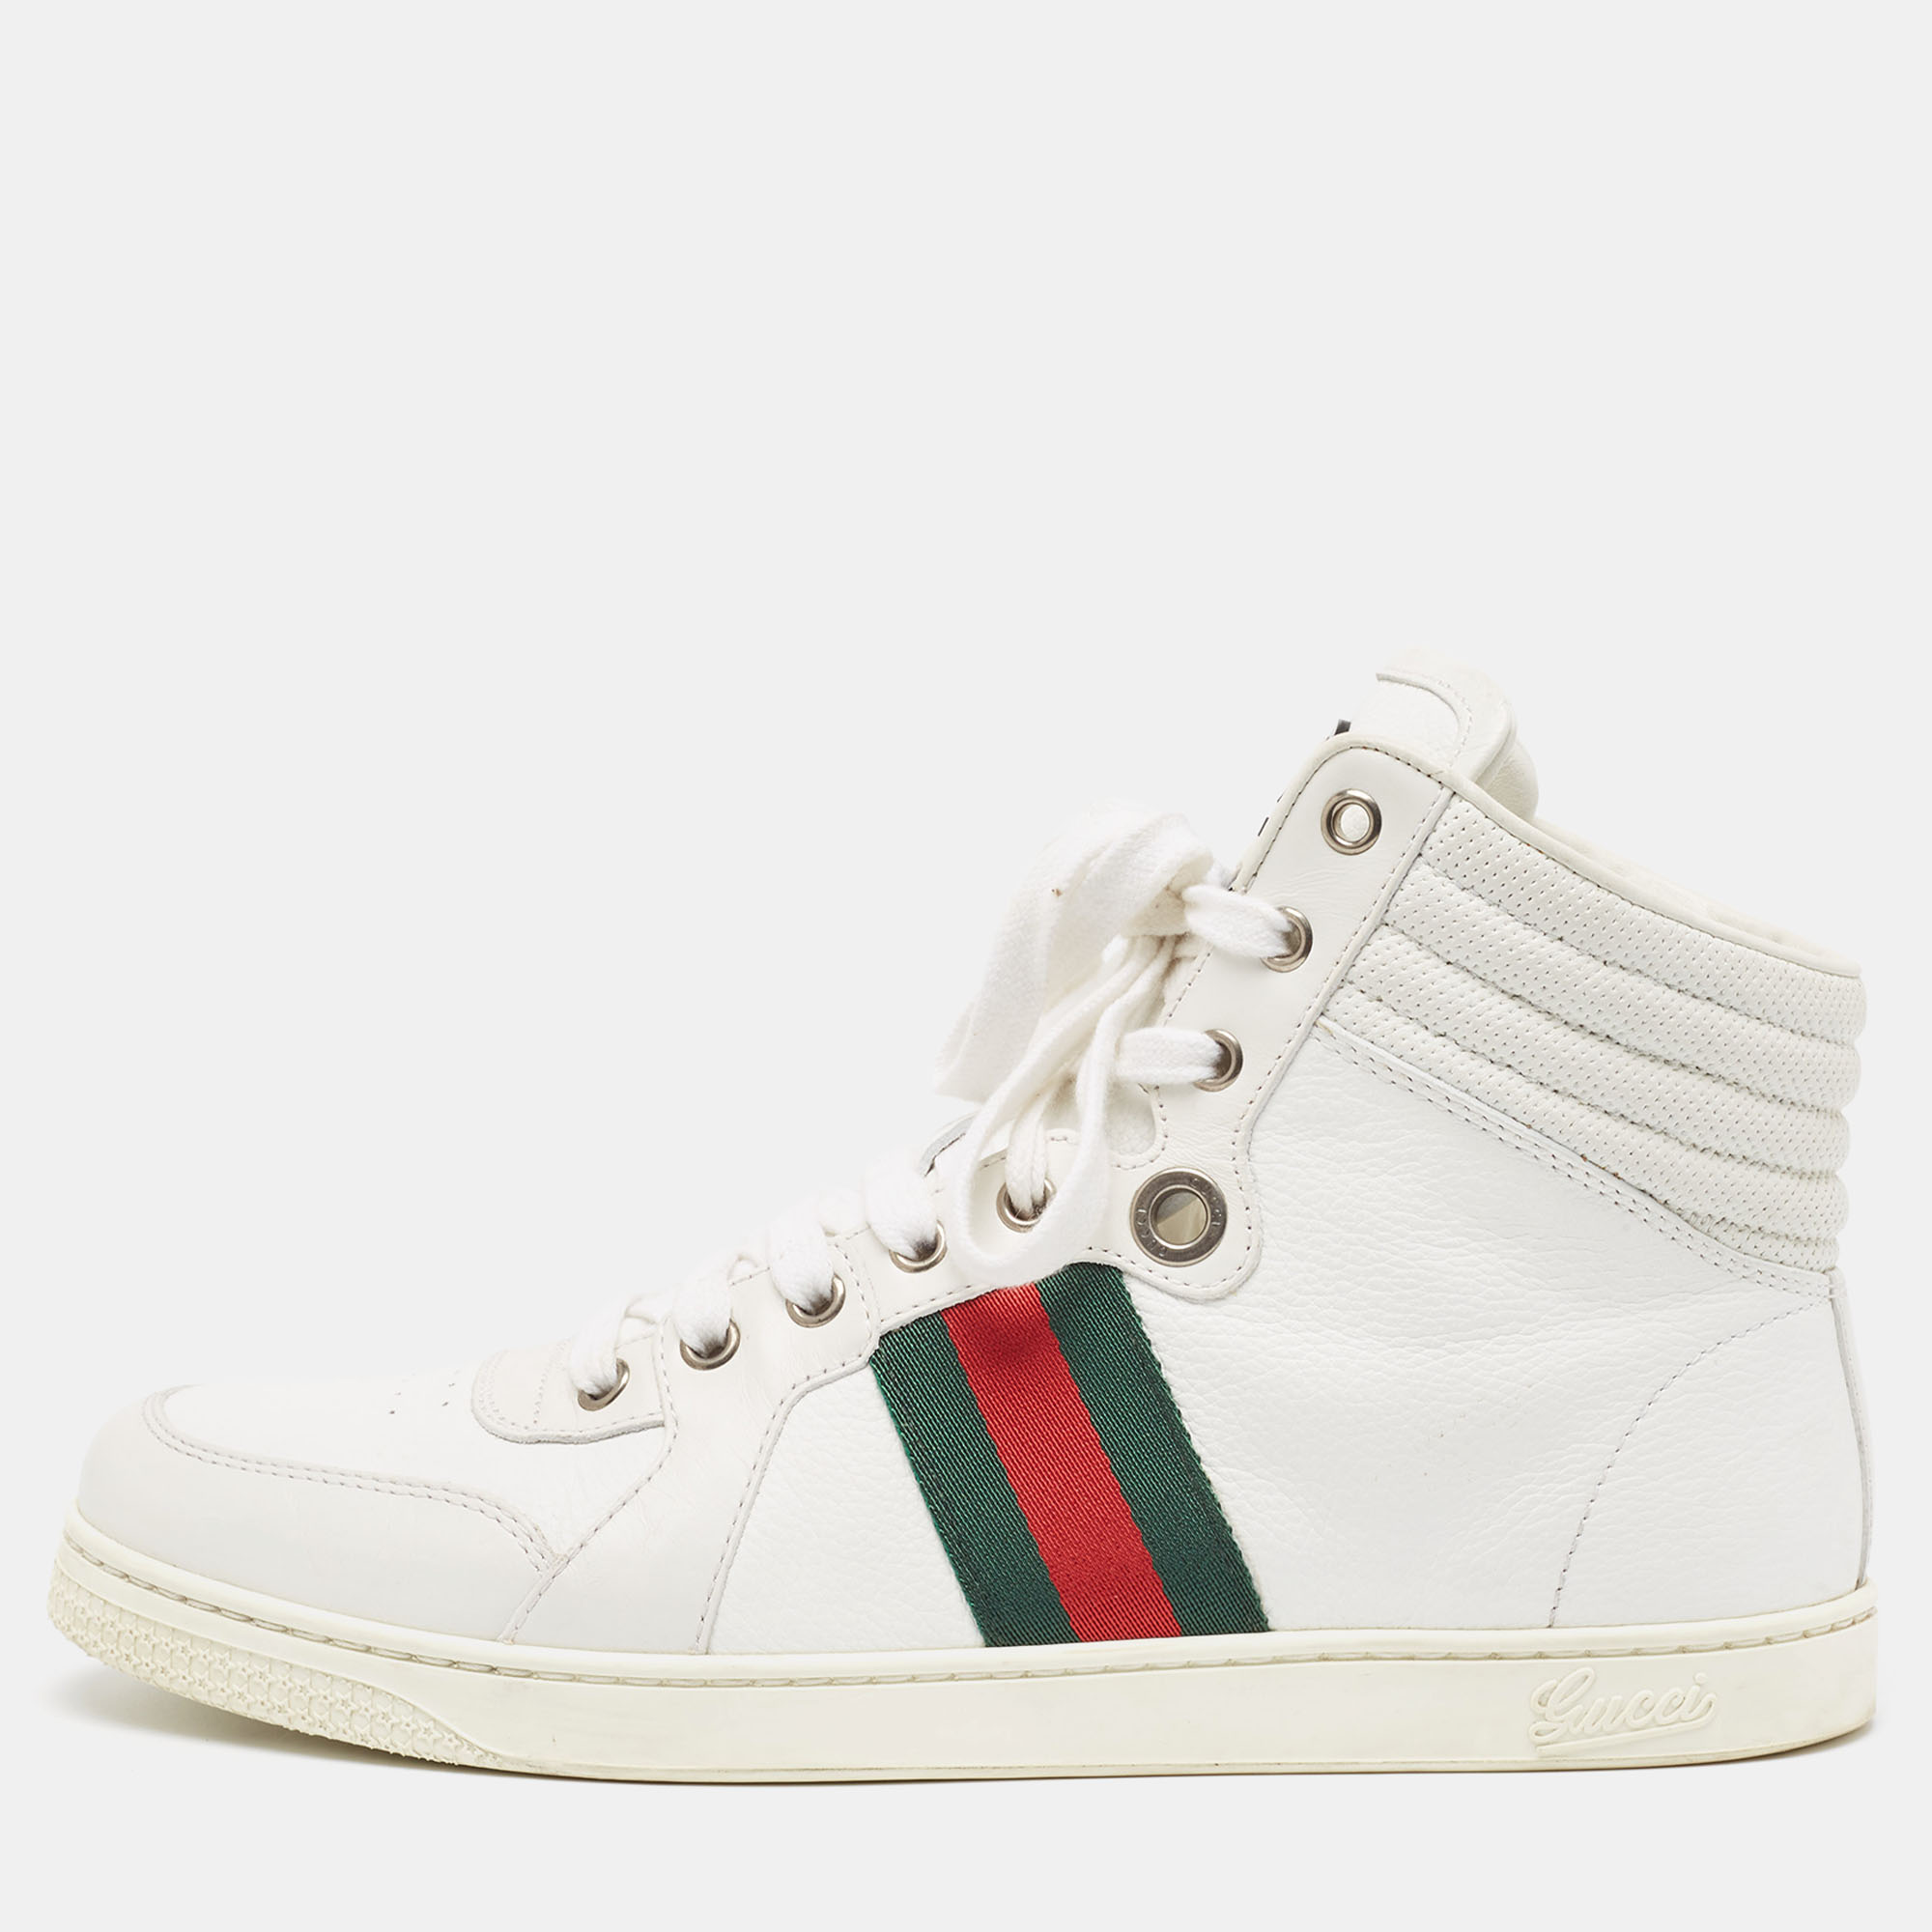 Pre-owned Gucci White Leather Web Detail High Top Sneakers Size 41.5